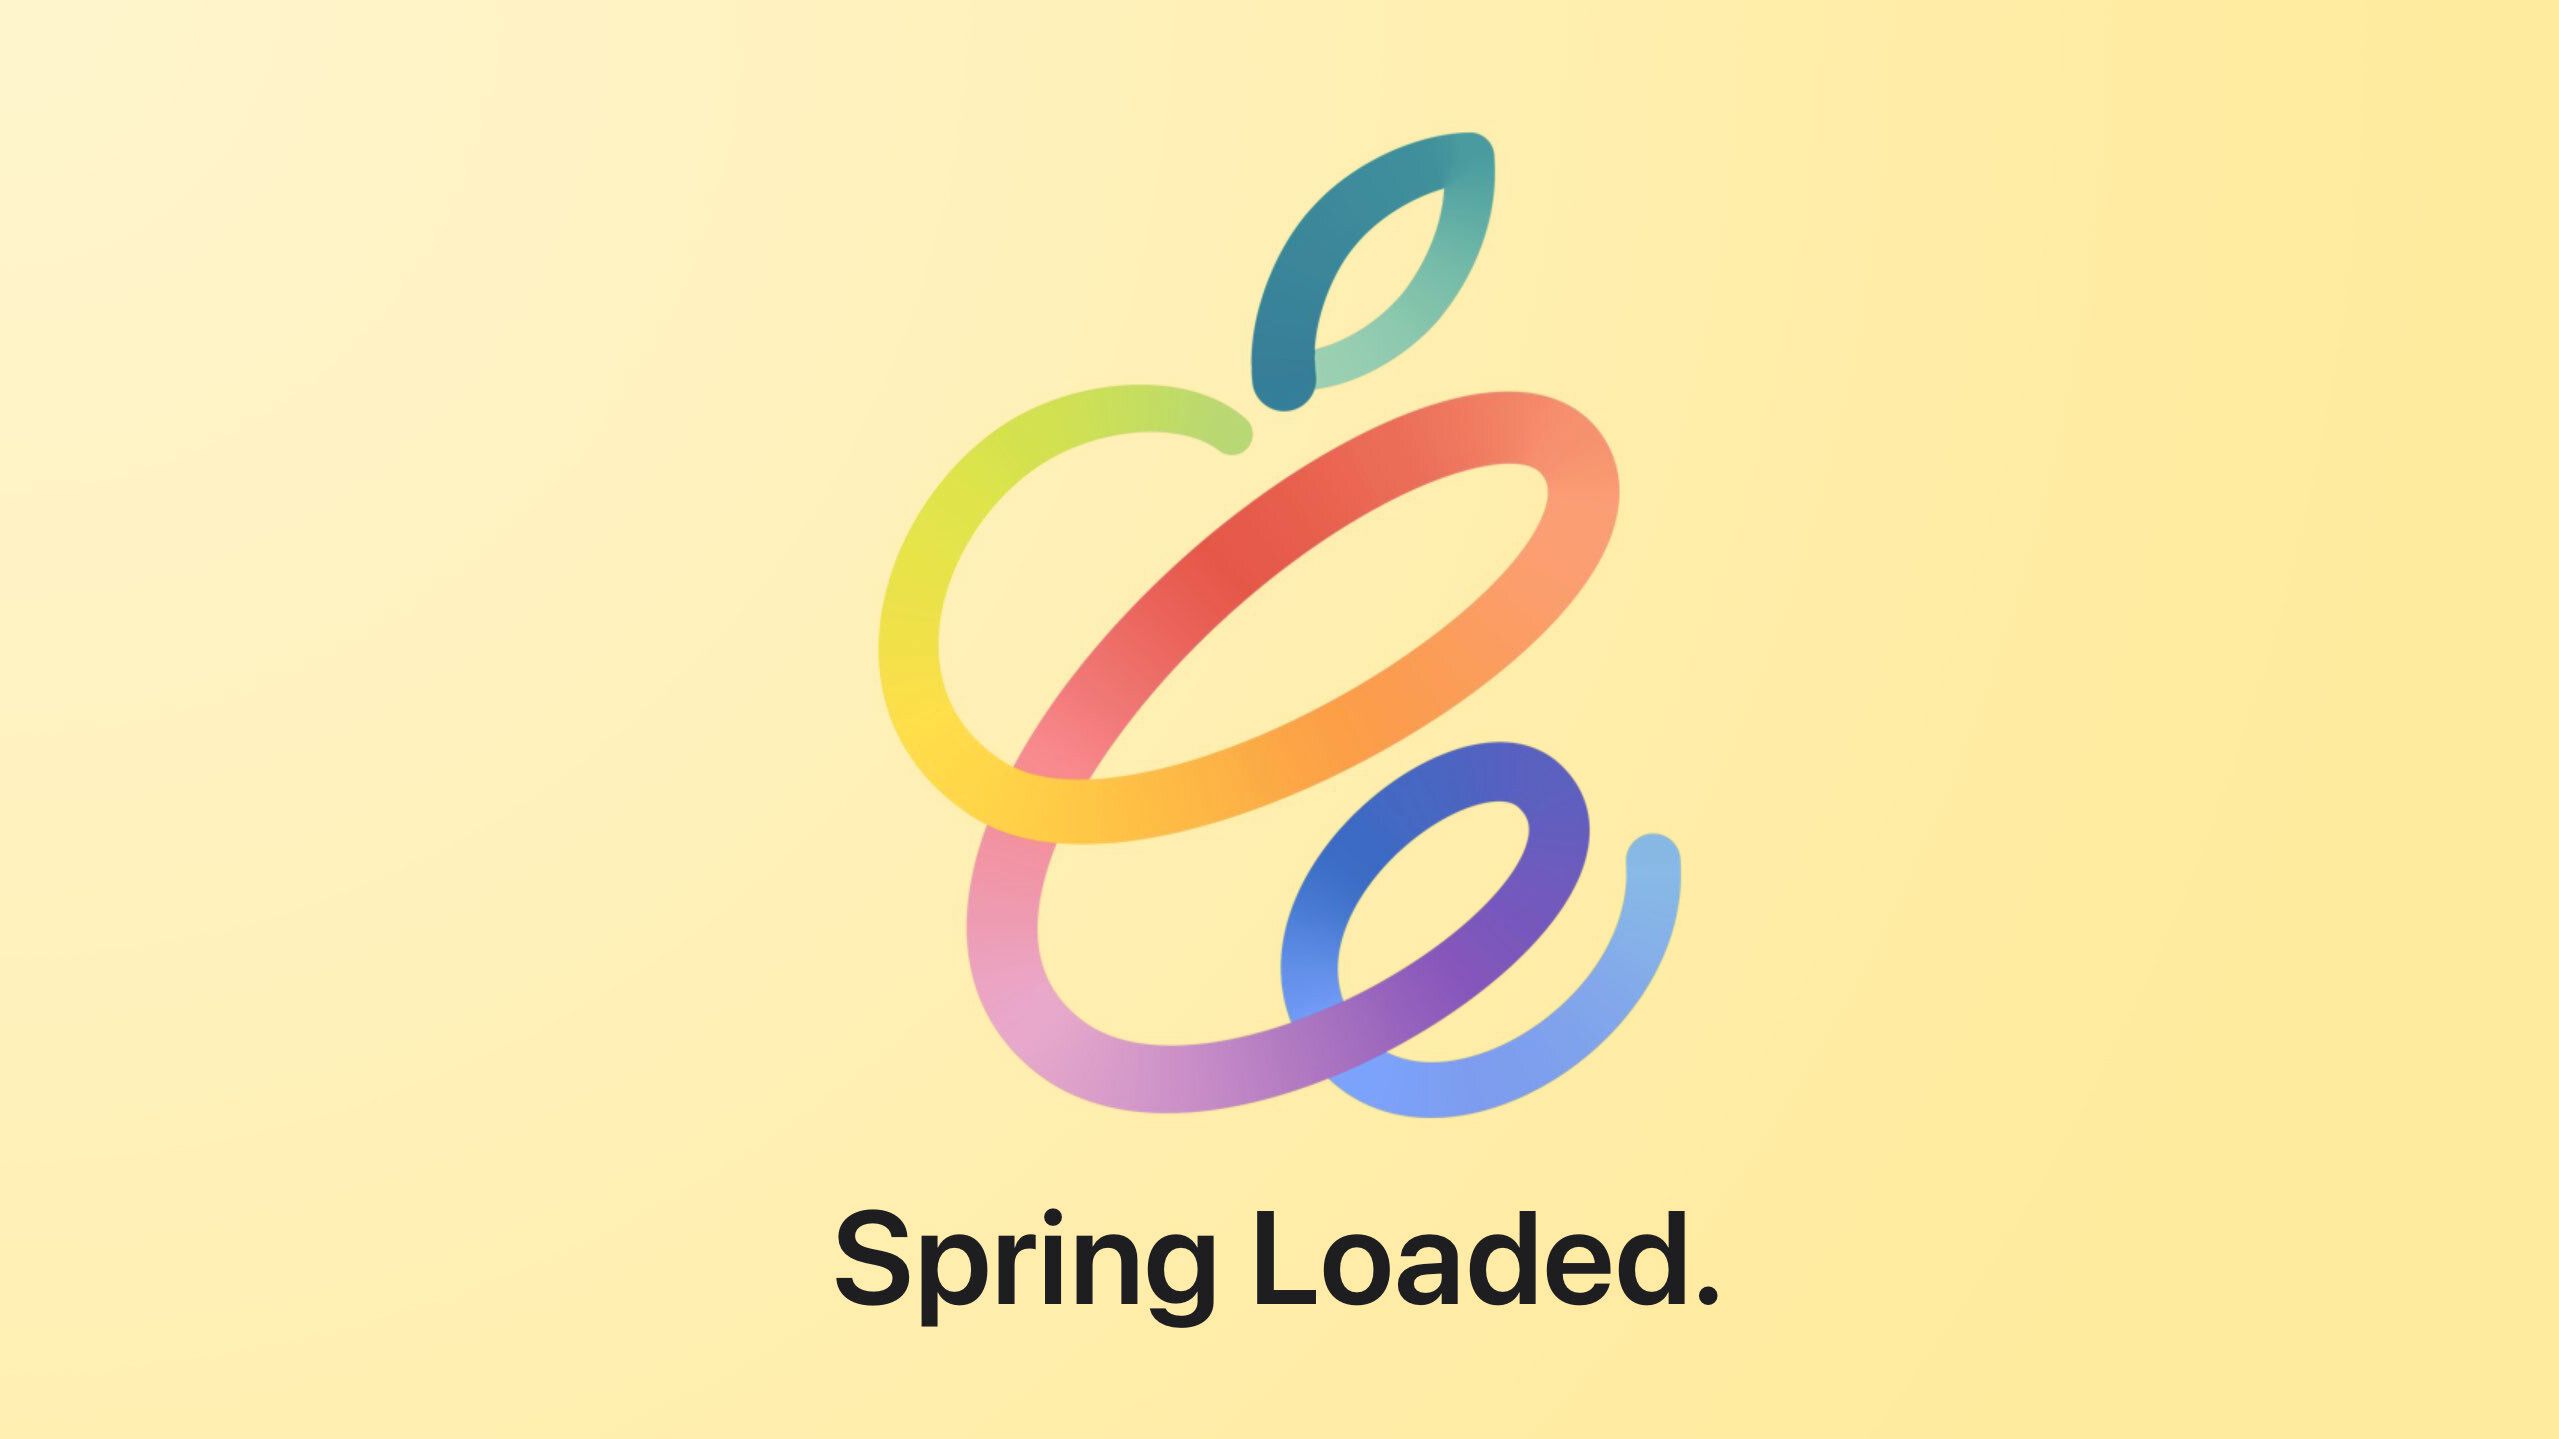 Apple's 'Spring Loaded' Event Officially Announced for Tuesday, April